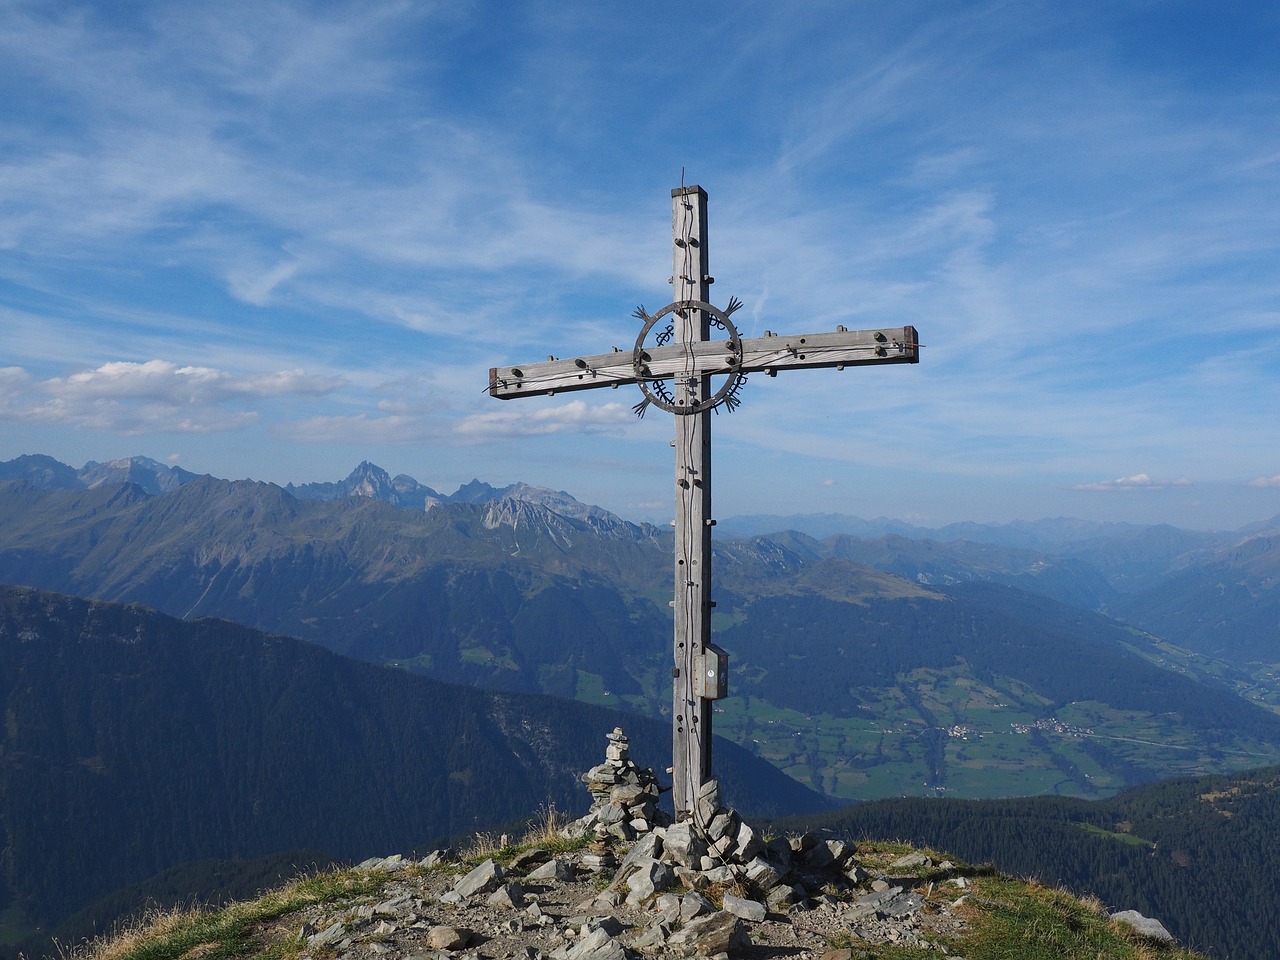 jaufenspitze,summit cross,cross,mountains,view,white wall,high tooth,weather tip,pflerscher tribulaun,gschnitzer tribulaun,tribulaun,stubai alps,pit wall,black wall,north ross drive,distant view,alpine,alpenblick,panorama,free pictures, free photos, free images, royalty free, free illustrations, public domain